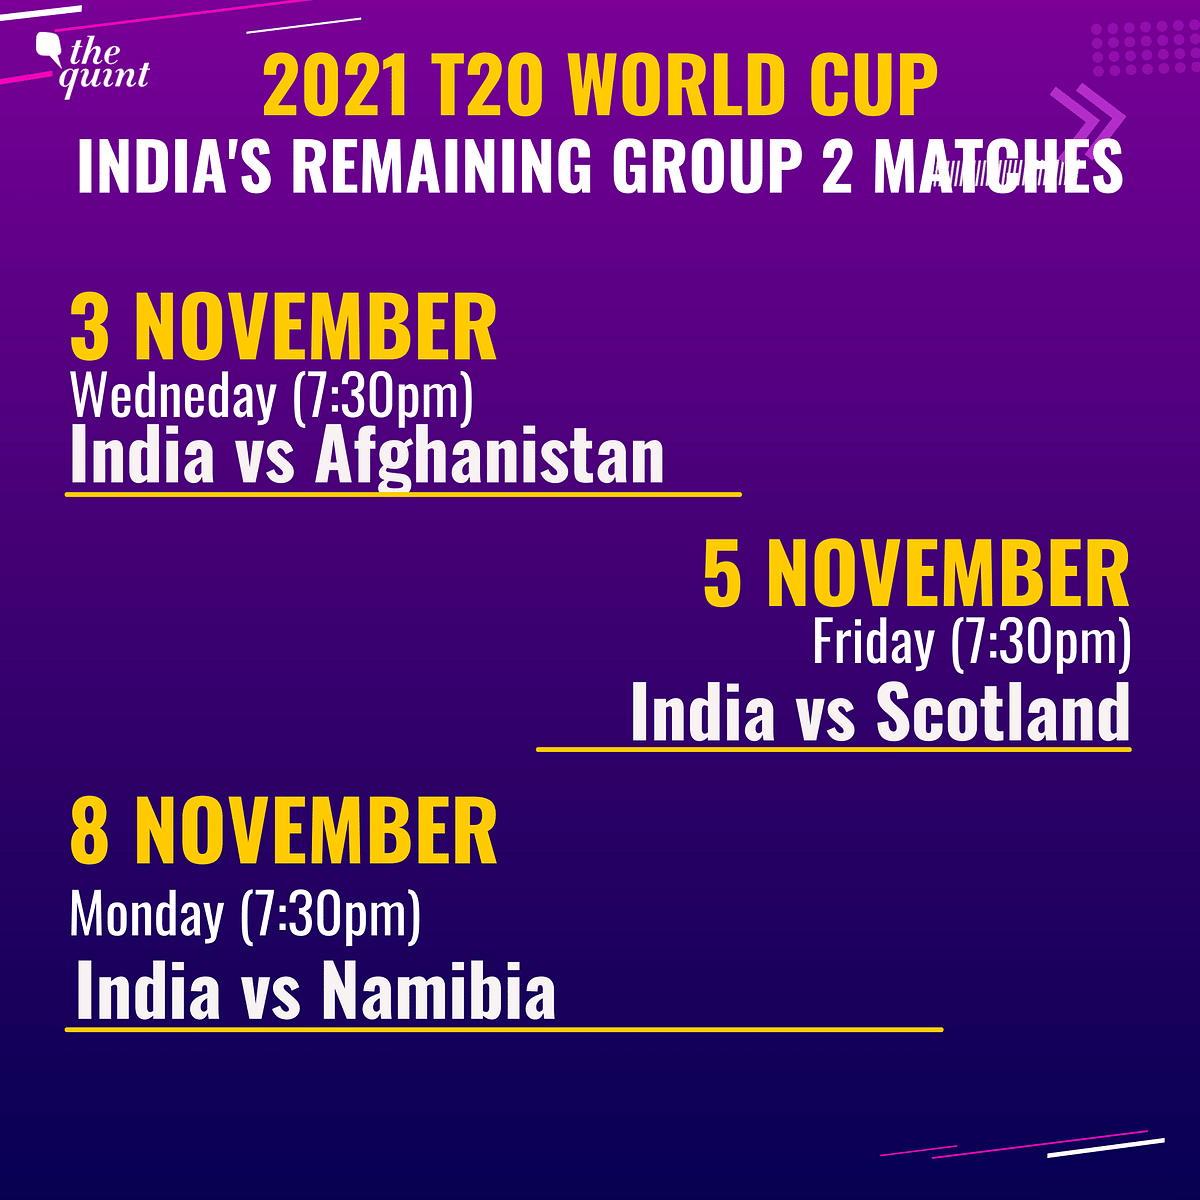 India have lost both their matches of the 2021 T20 World Cup so far.